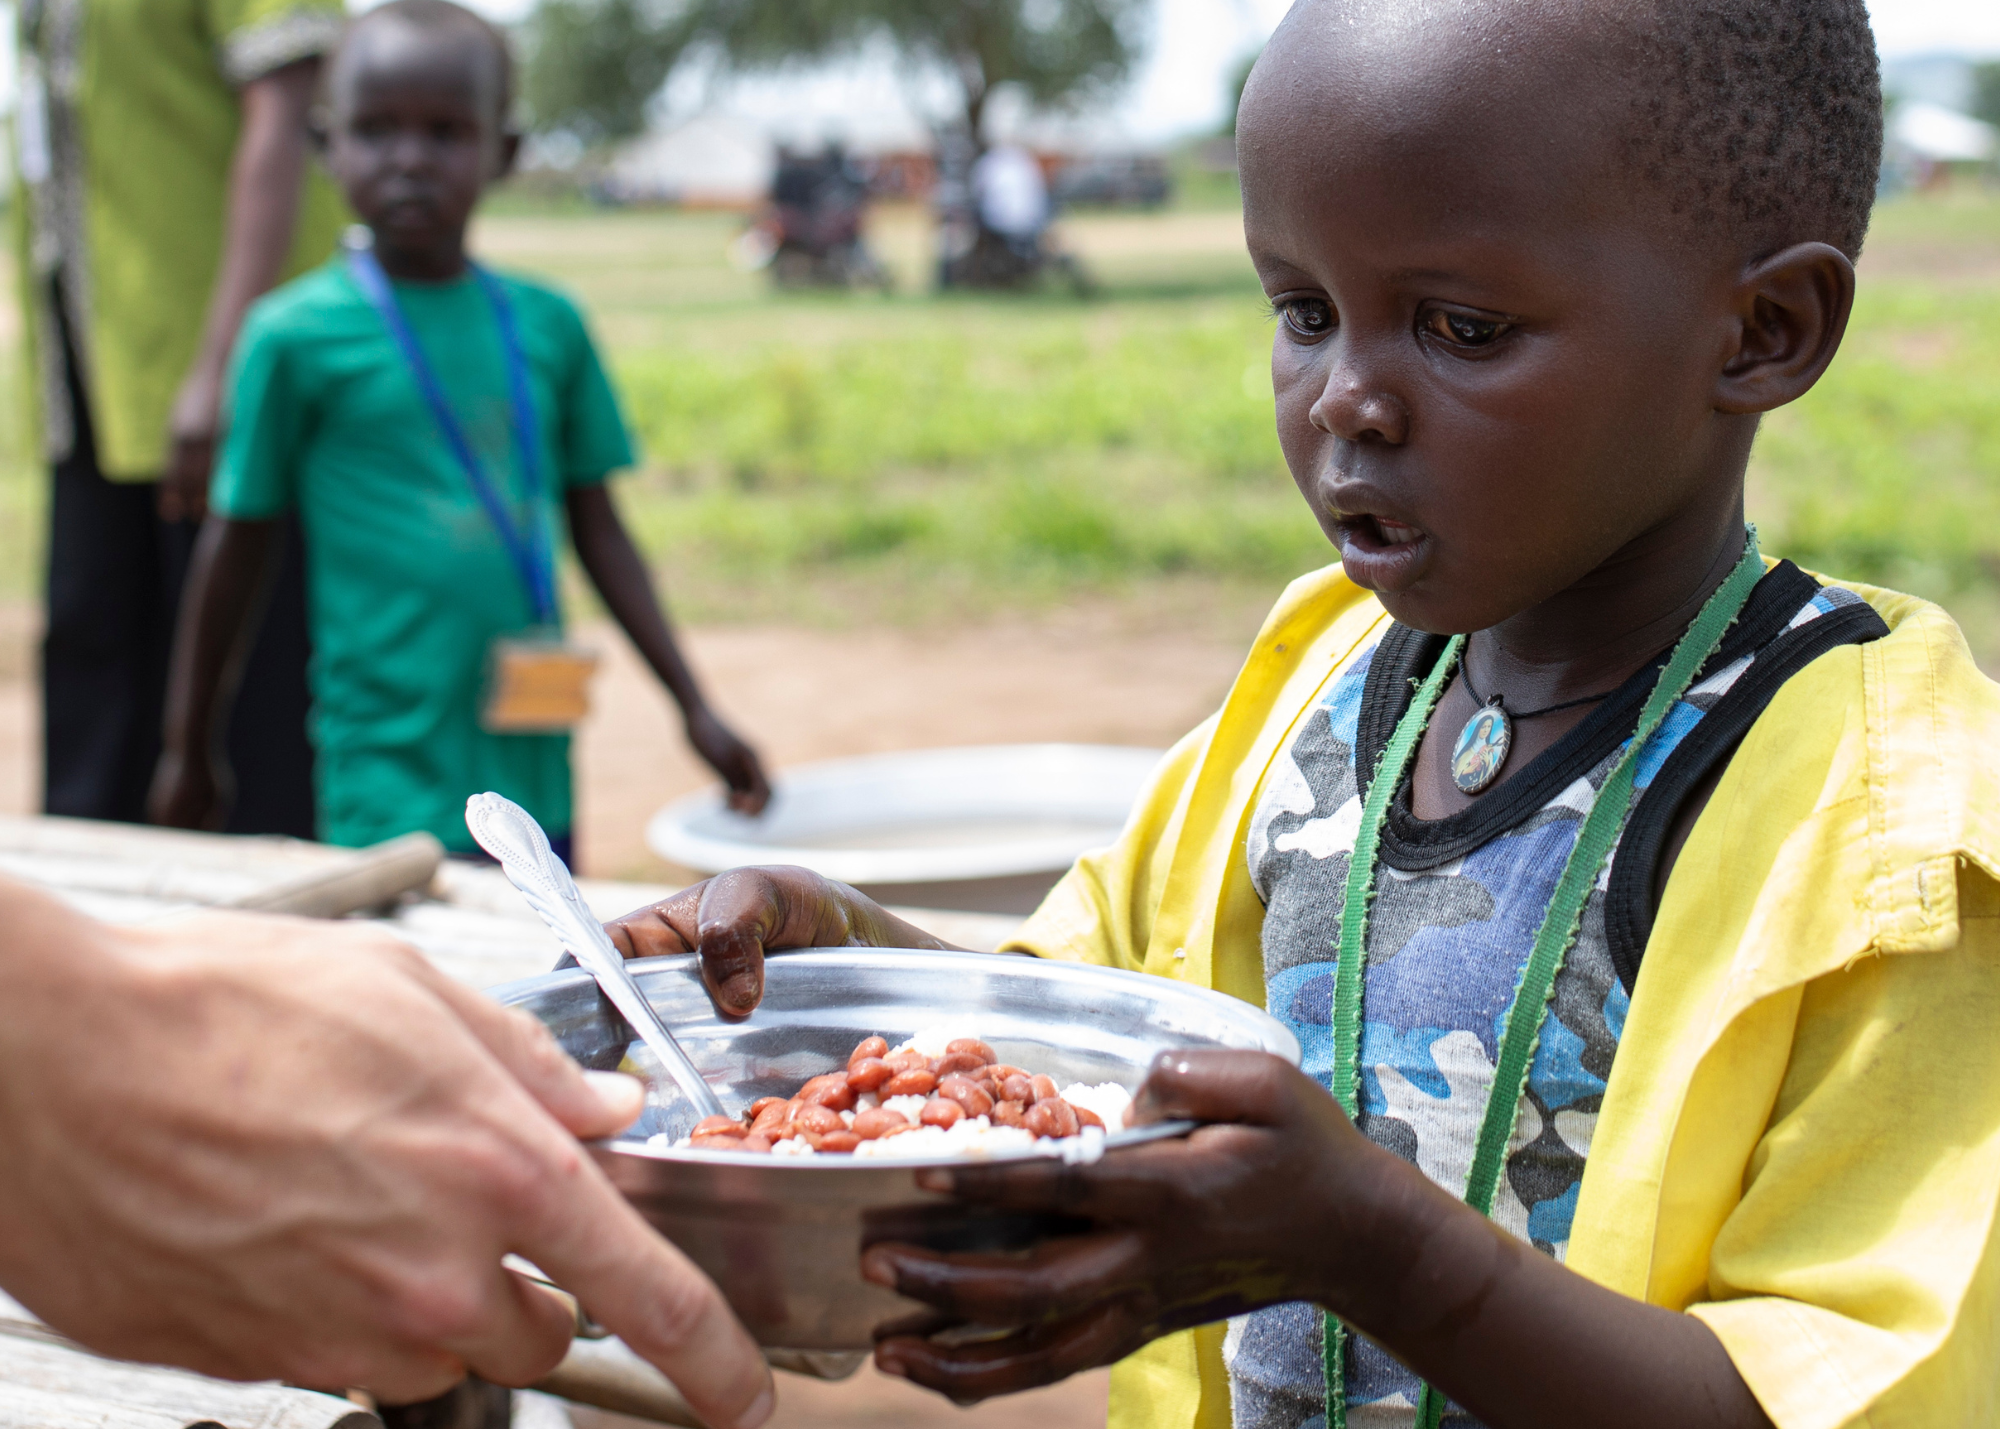 Hungry Children Are Fed in South Sudan